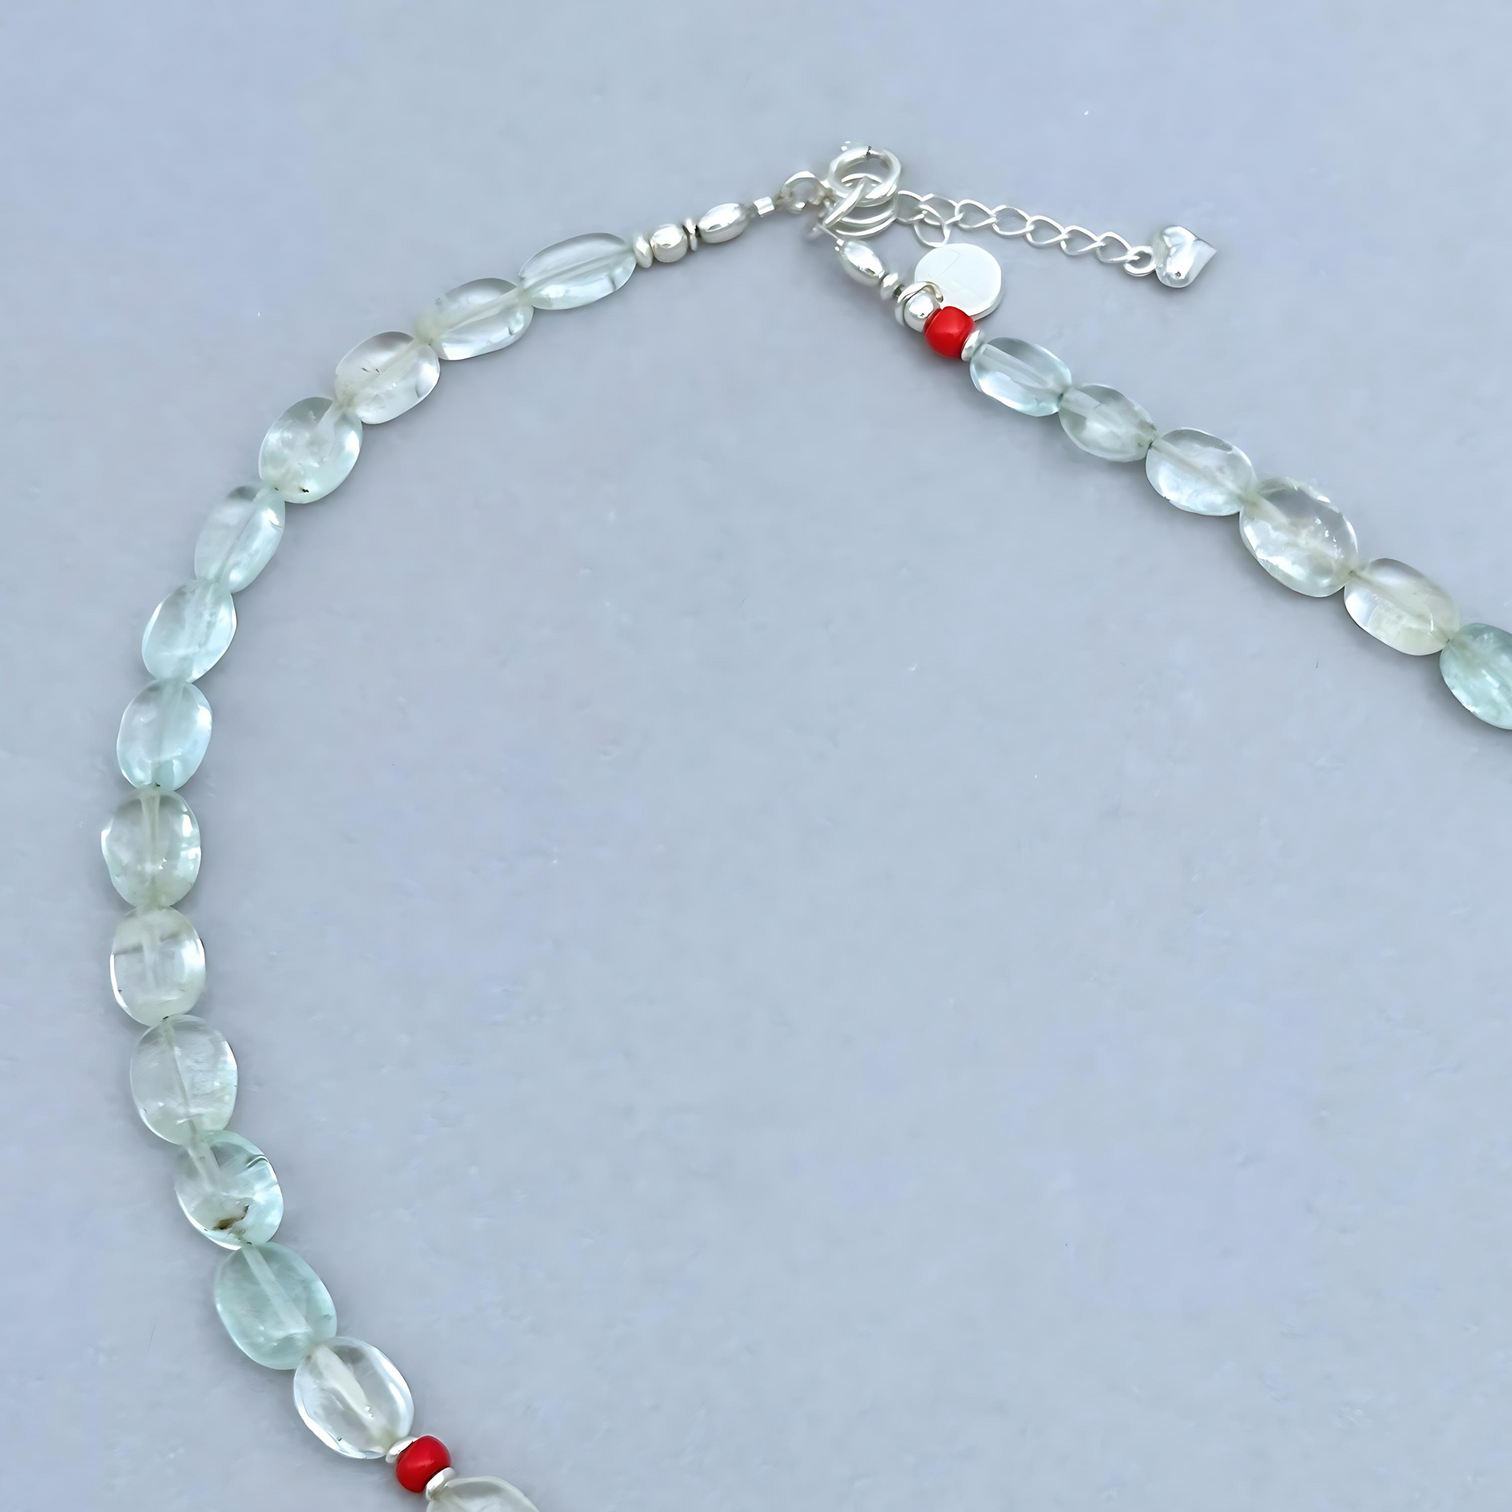 The Le BijouBijou Gemma Necklace is a delicate beauty. Made with oval-shaped pale blue Aquamarines and a touch of Coral.